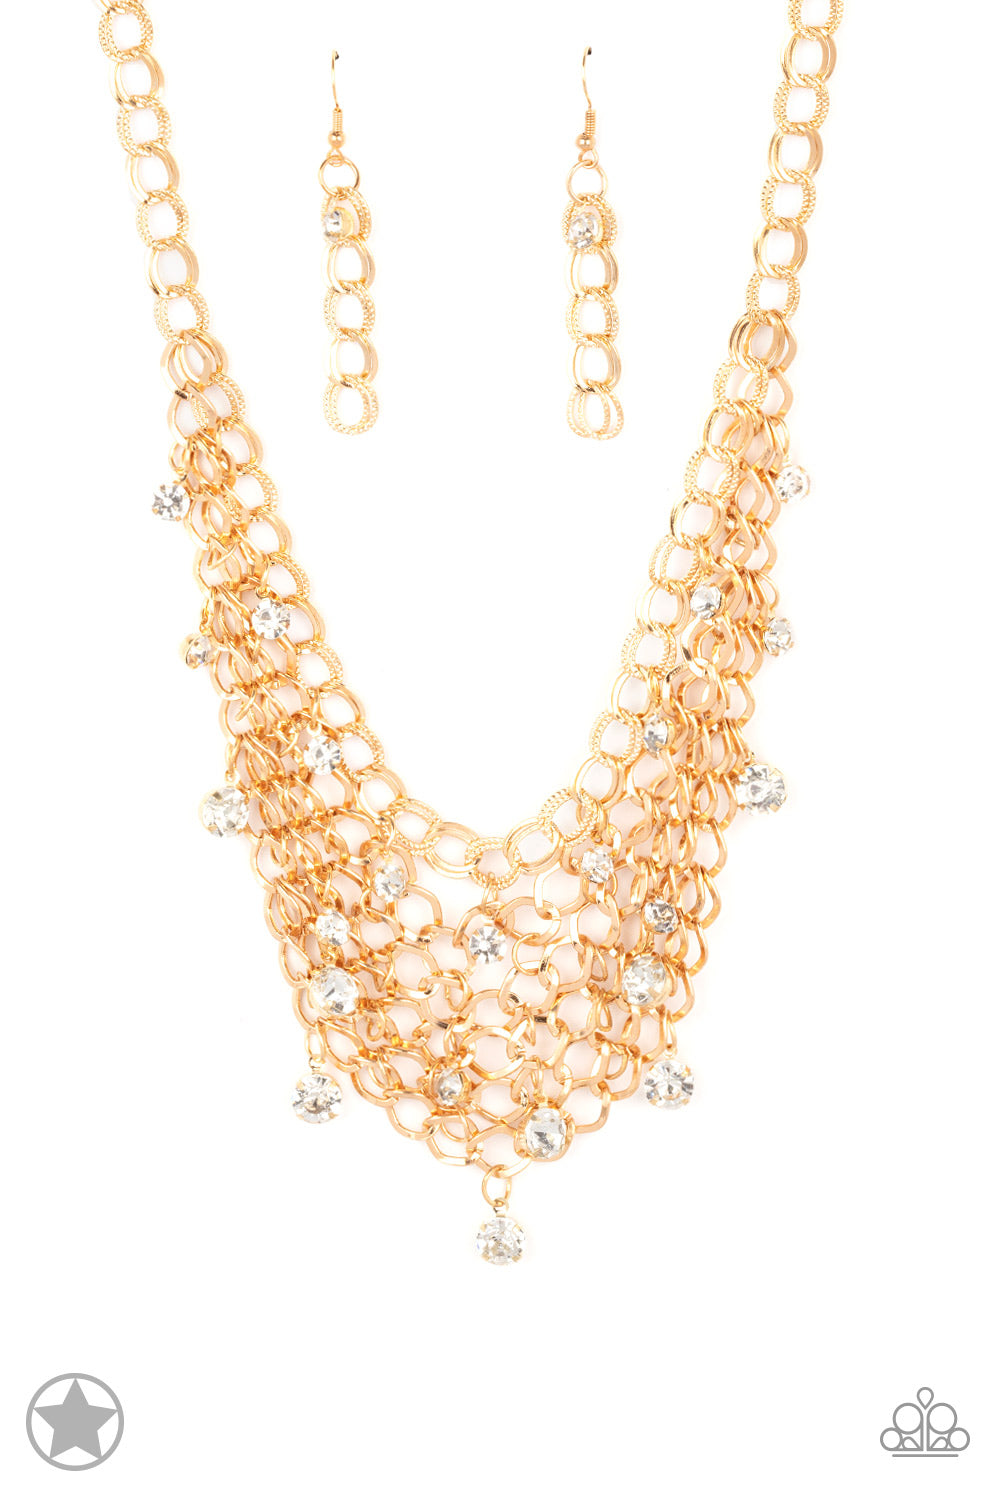 . Fishing for Compliments - Gold Necklace